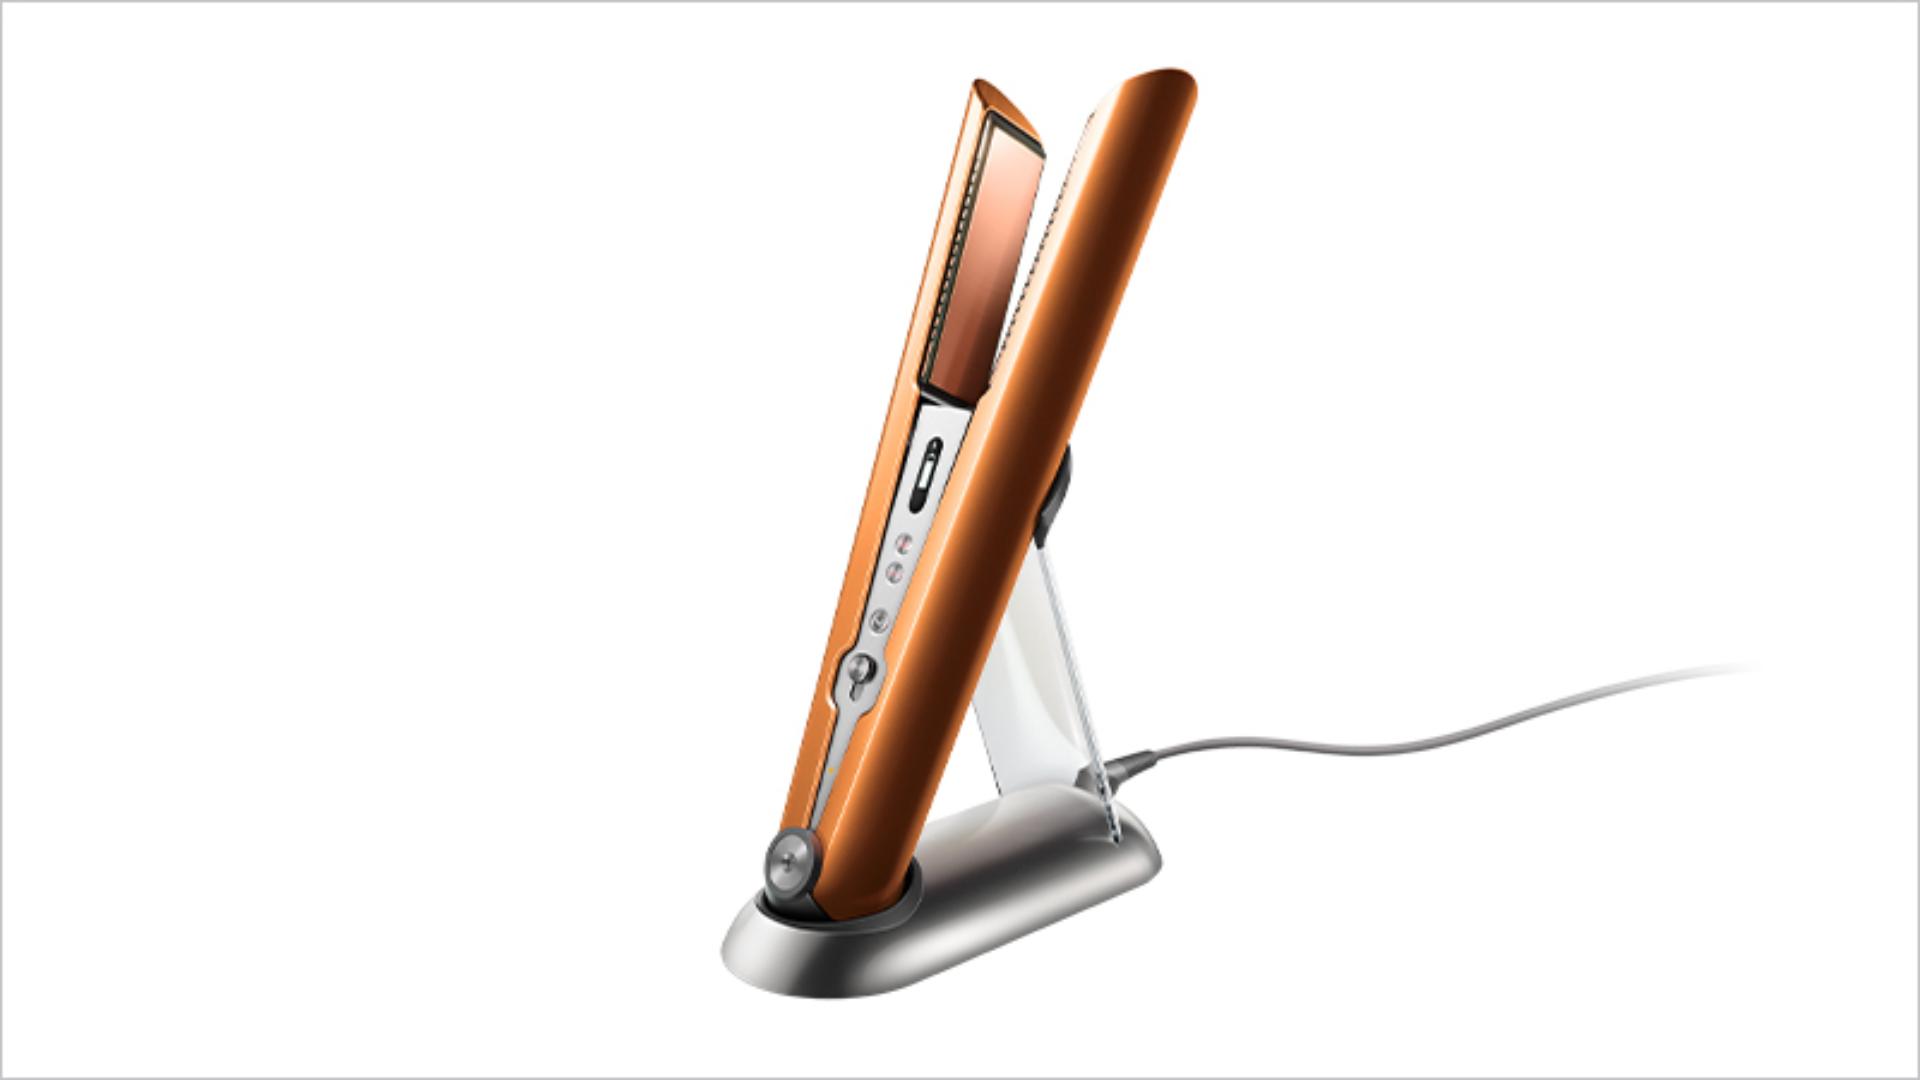 Straightener placed in the charging dock